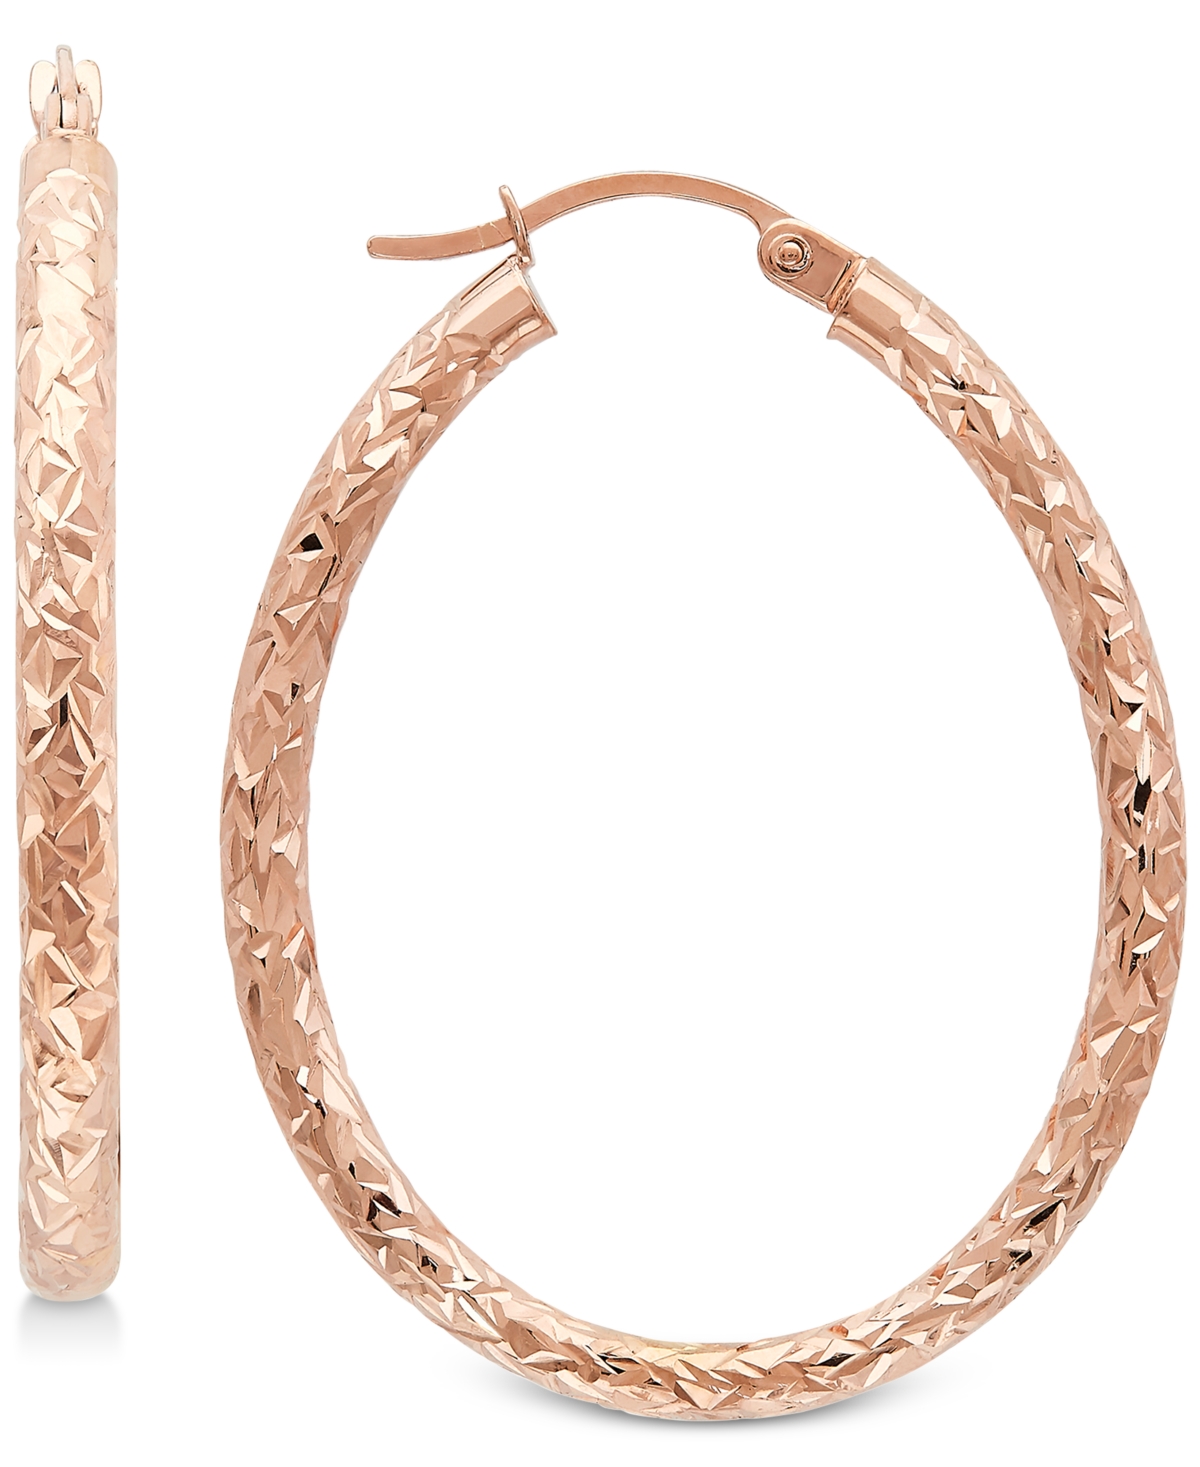 Textured Oval Hoop Earrings in 14k Gold, 1-3/8 inch - Rose Gold